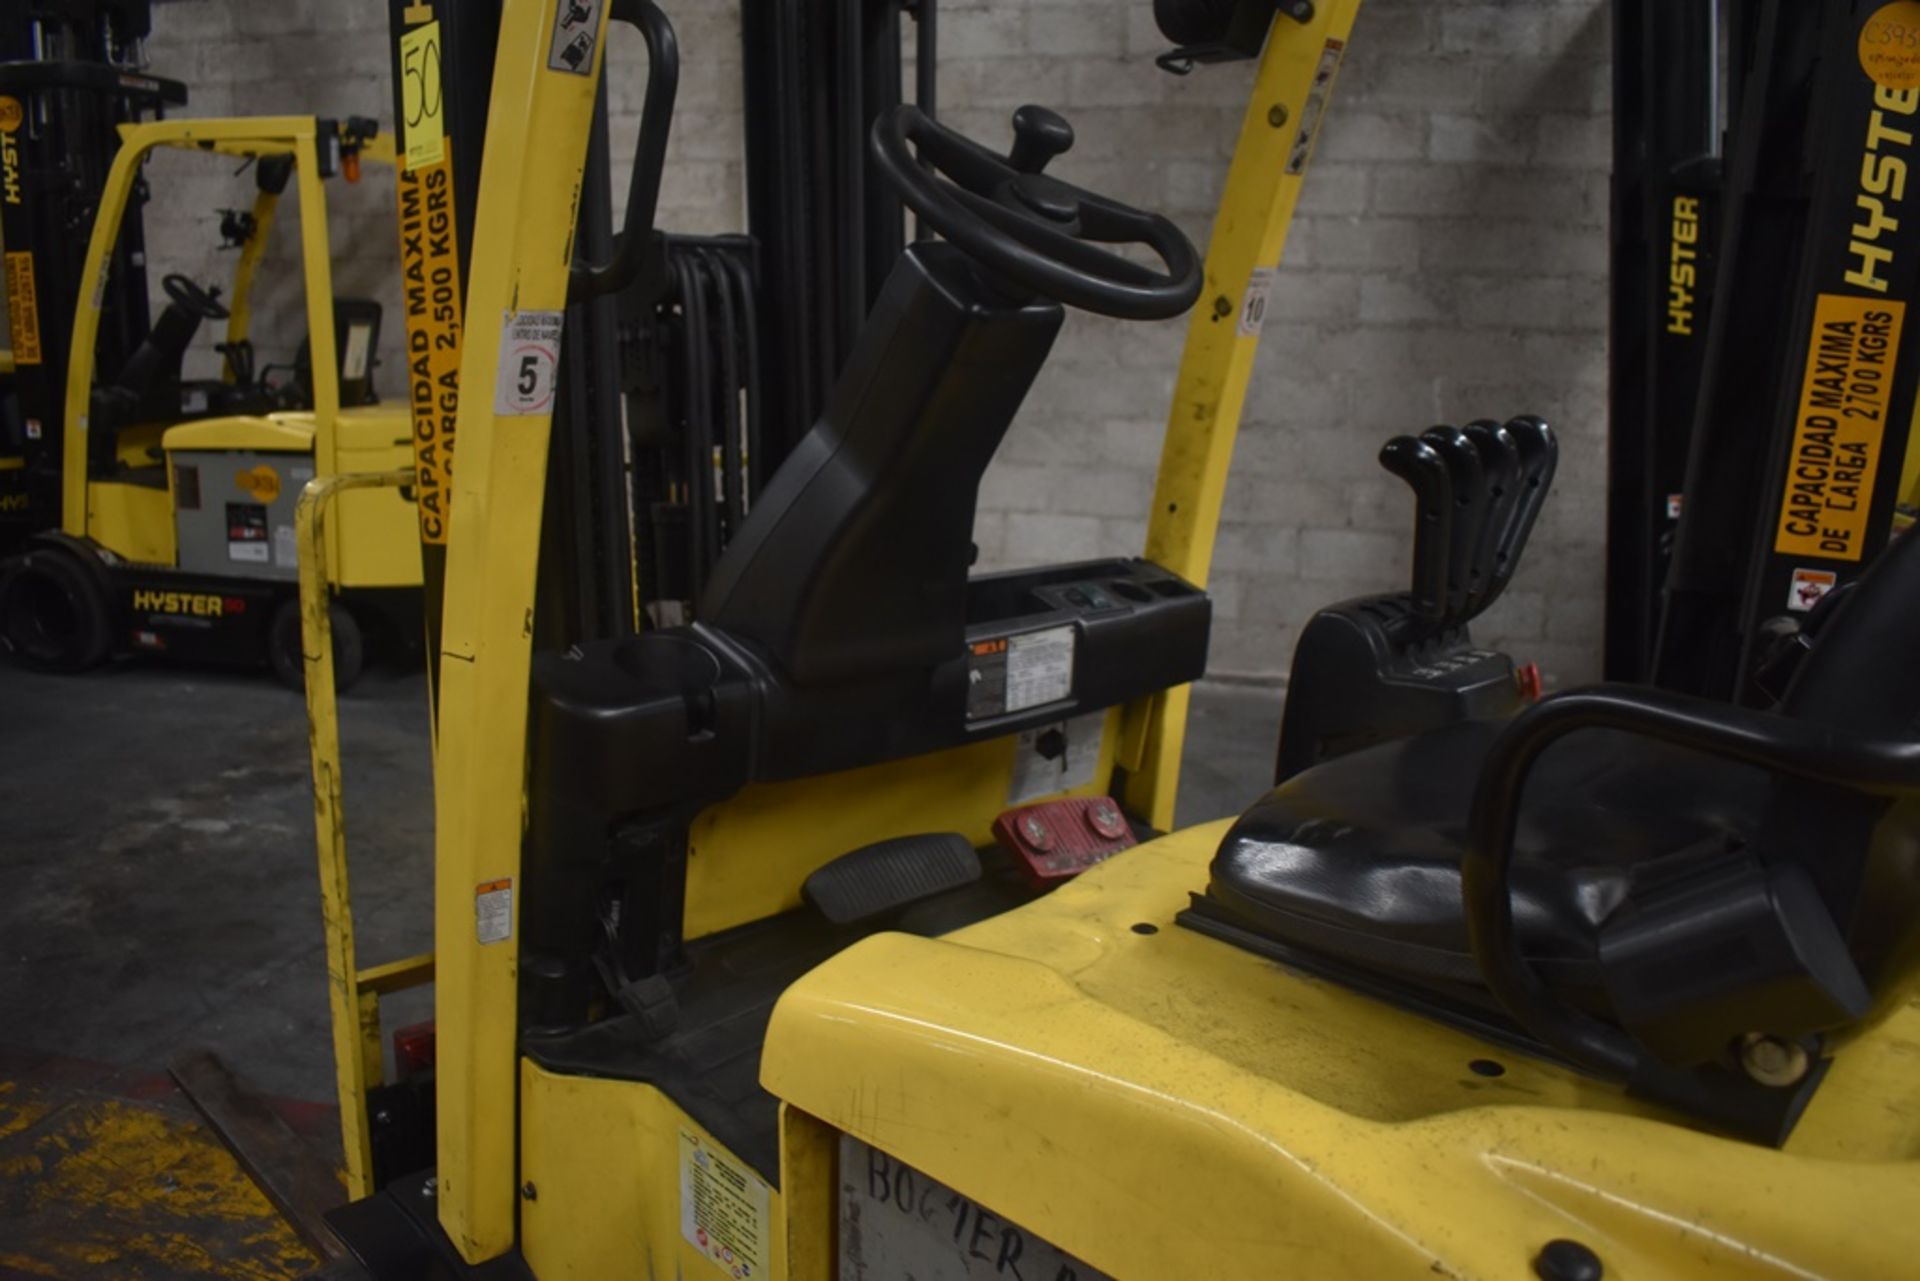 Hyster Electric Forklift, Model E50XN-27, S/N A268N20229P, Year 2016, 4750 lb Capacity - Image 38 of 43